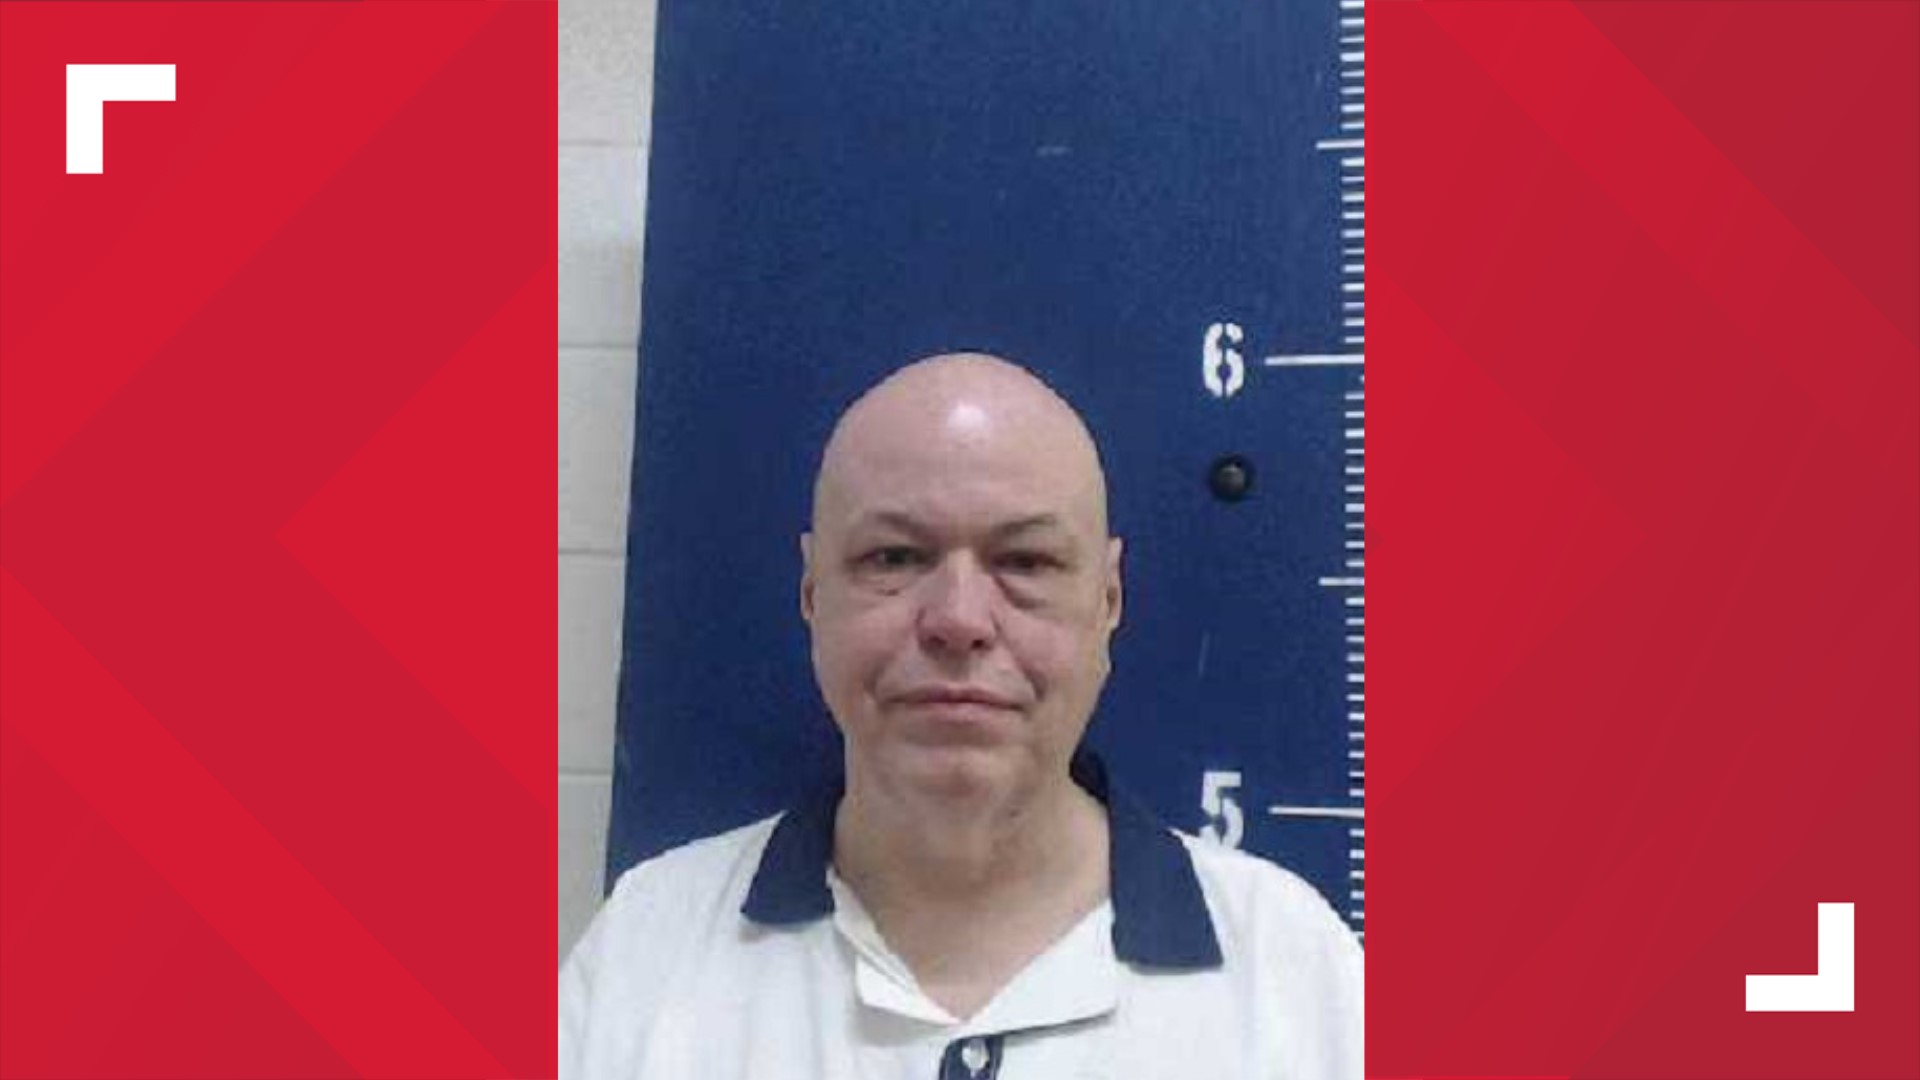 Virgil Delano Presnell, Jr. was scheduled to be executed Tuesday, May 17 at 7 p.m. at the Georgia Diagnostic and Classification Prison in Jackson.